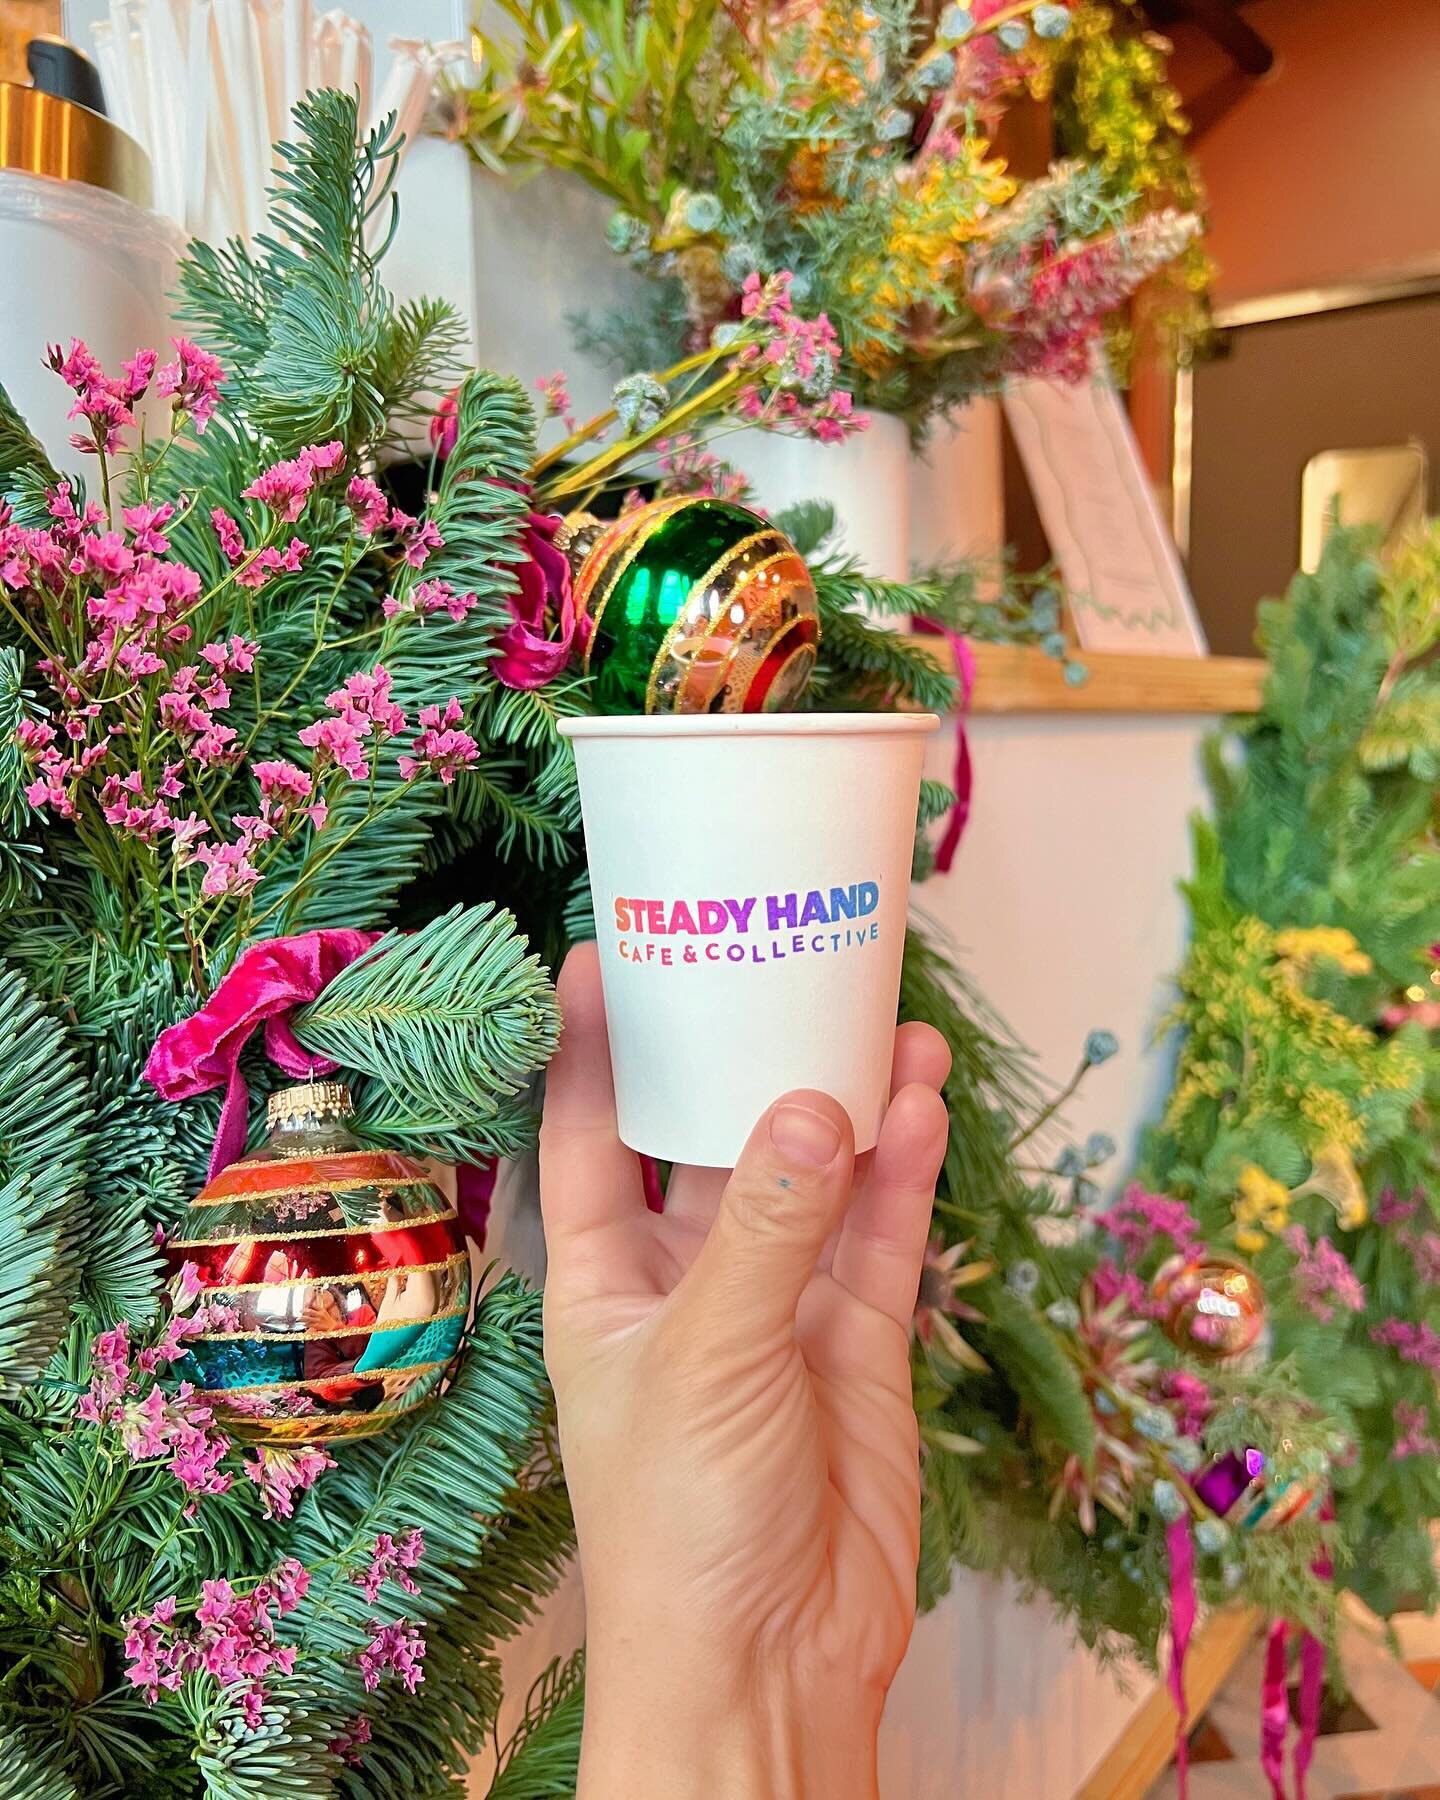 Holidays but make it ✨Steady Hand✨ 🌈☕️🎄

@threegirlsfloral designed us the most  colorful, wild, and whimsical garland installation for the pop up cafe at @rbar_asburypark . We&rsquo;re so so grateful to have such talented and generous friends in t